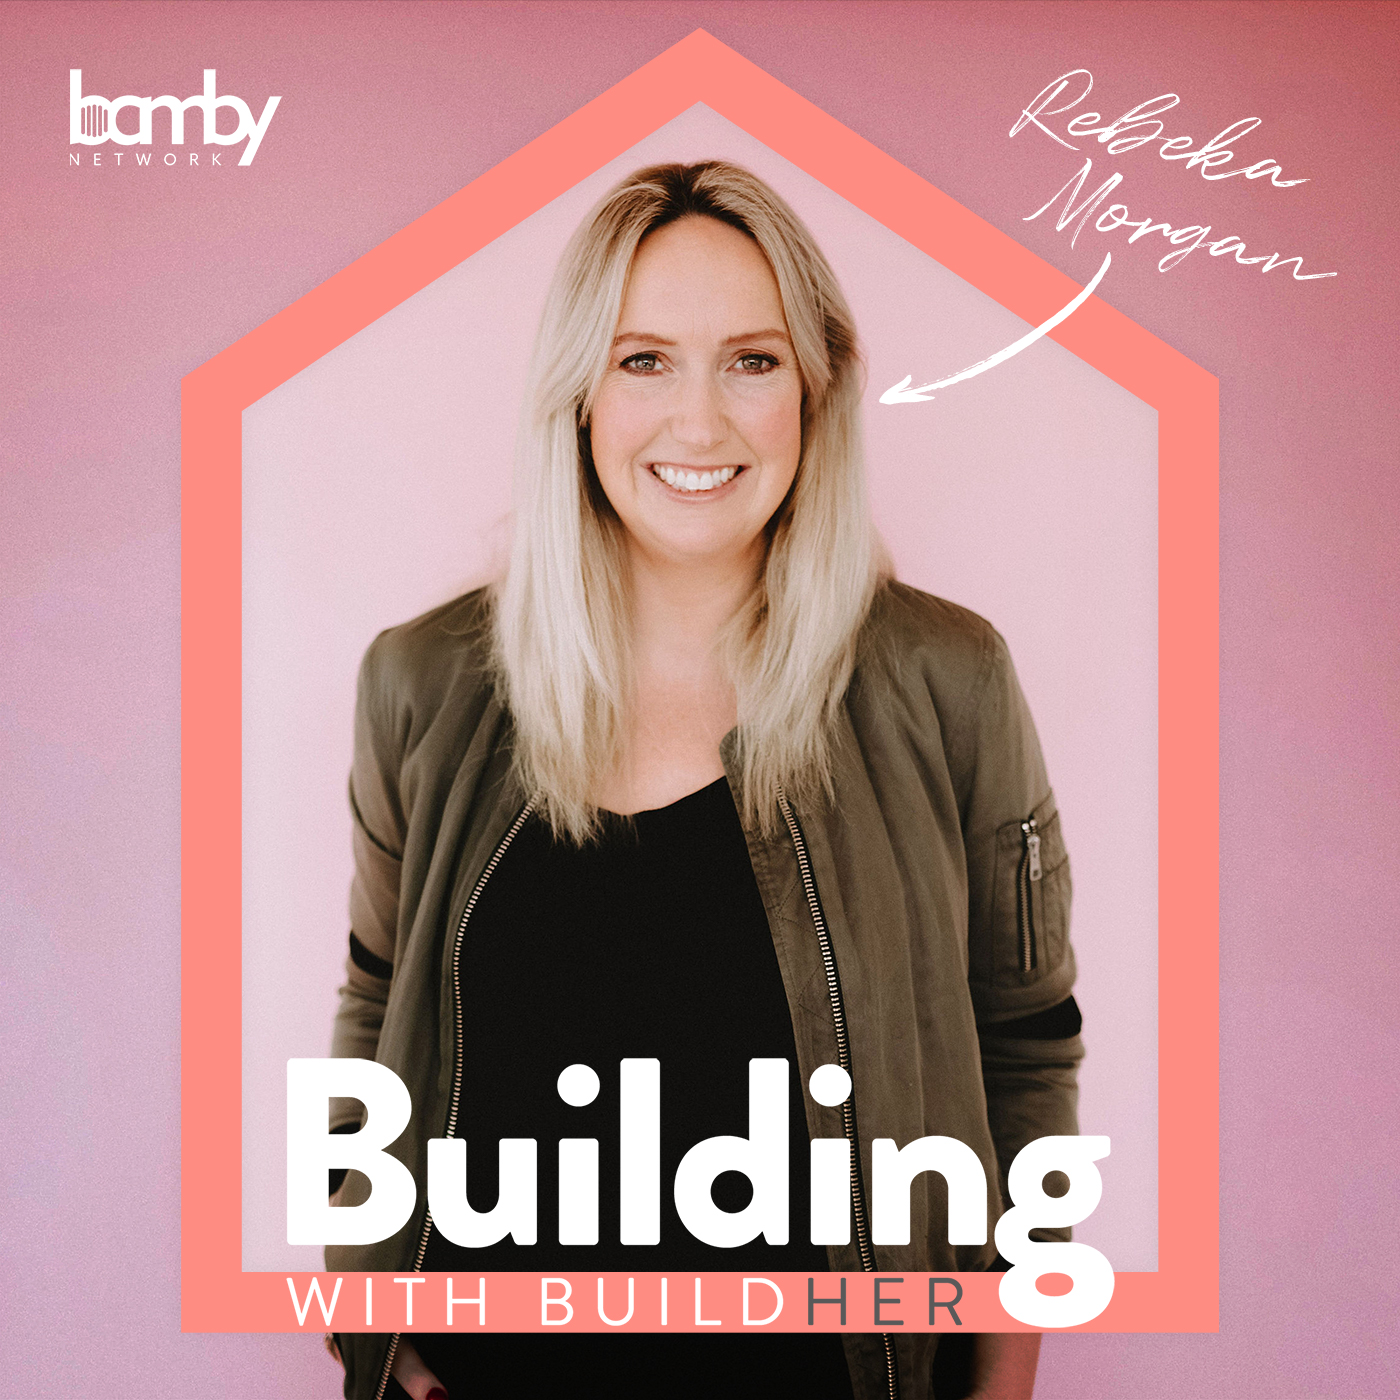 A Chat with Ali Waight - 5 Simple Things You Can Do to Give your Home a Refresh